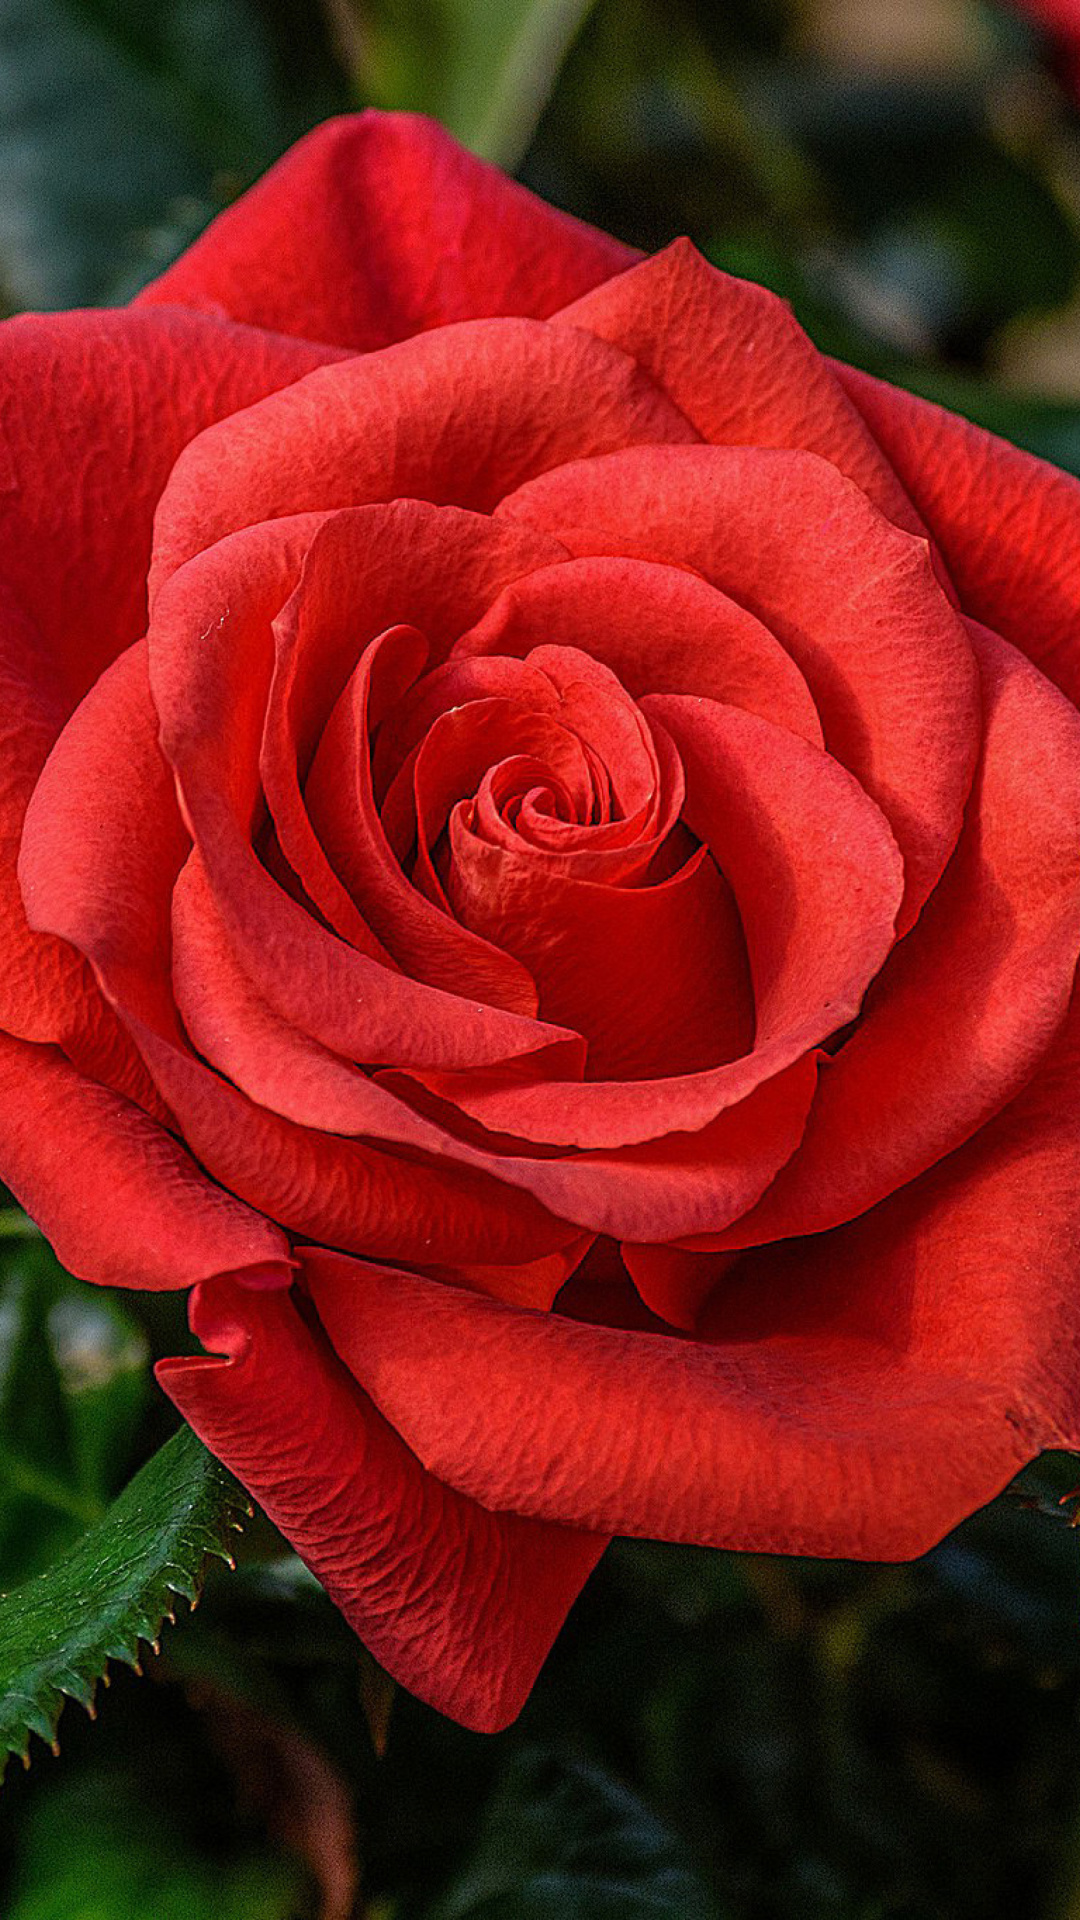 Lonely Red Rose wallpaper 1080x1920